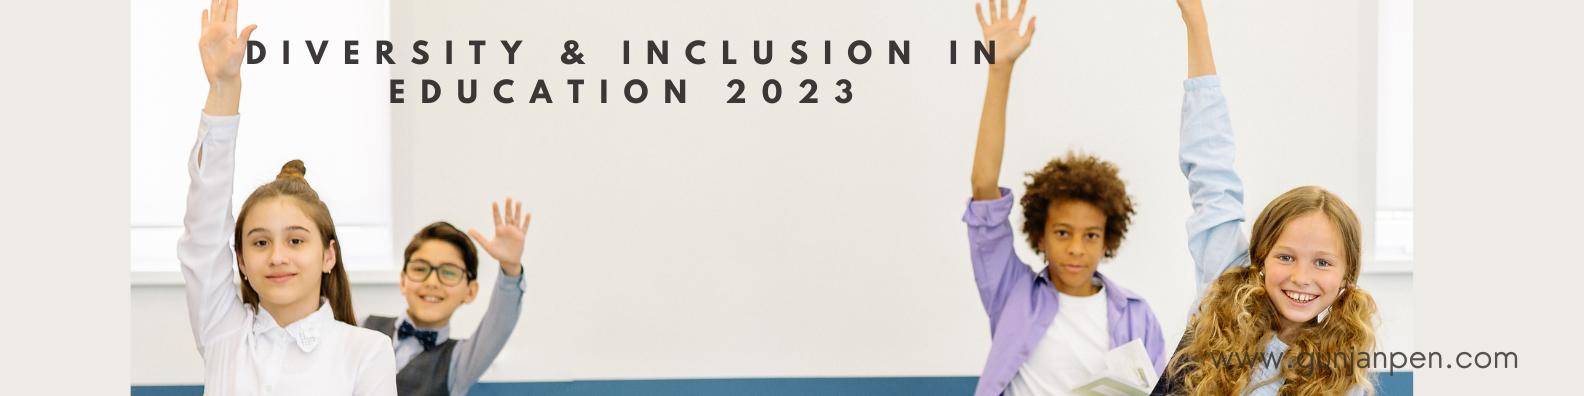 Diversity & Inclusion in Education 2023: Celebrating Differences